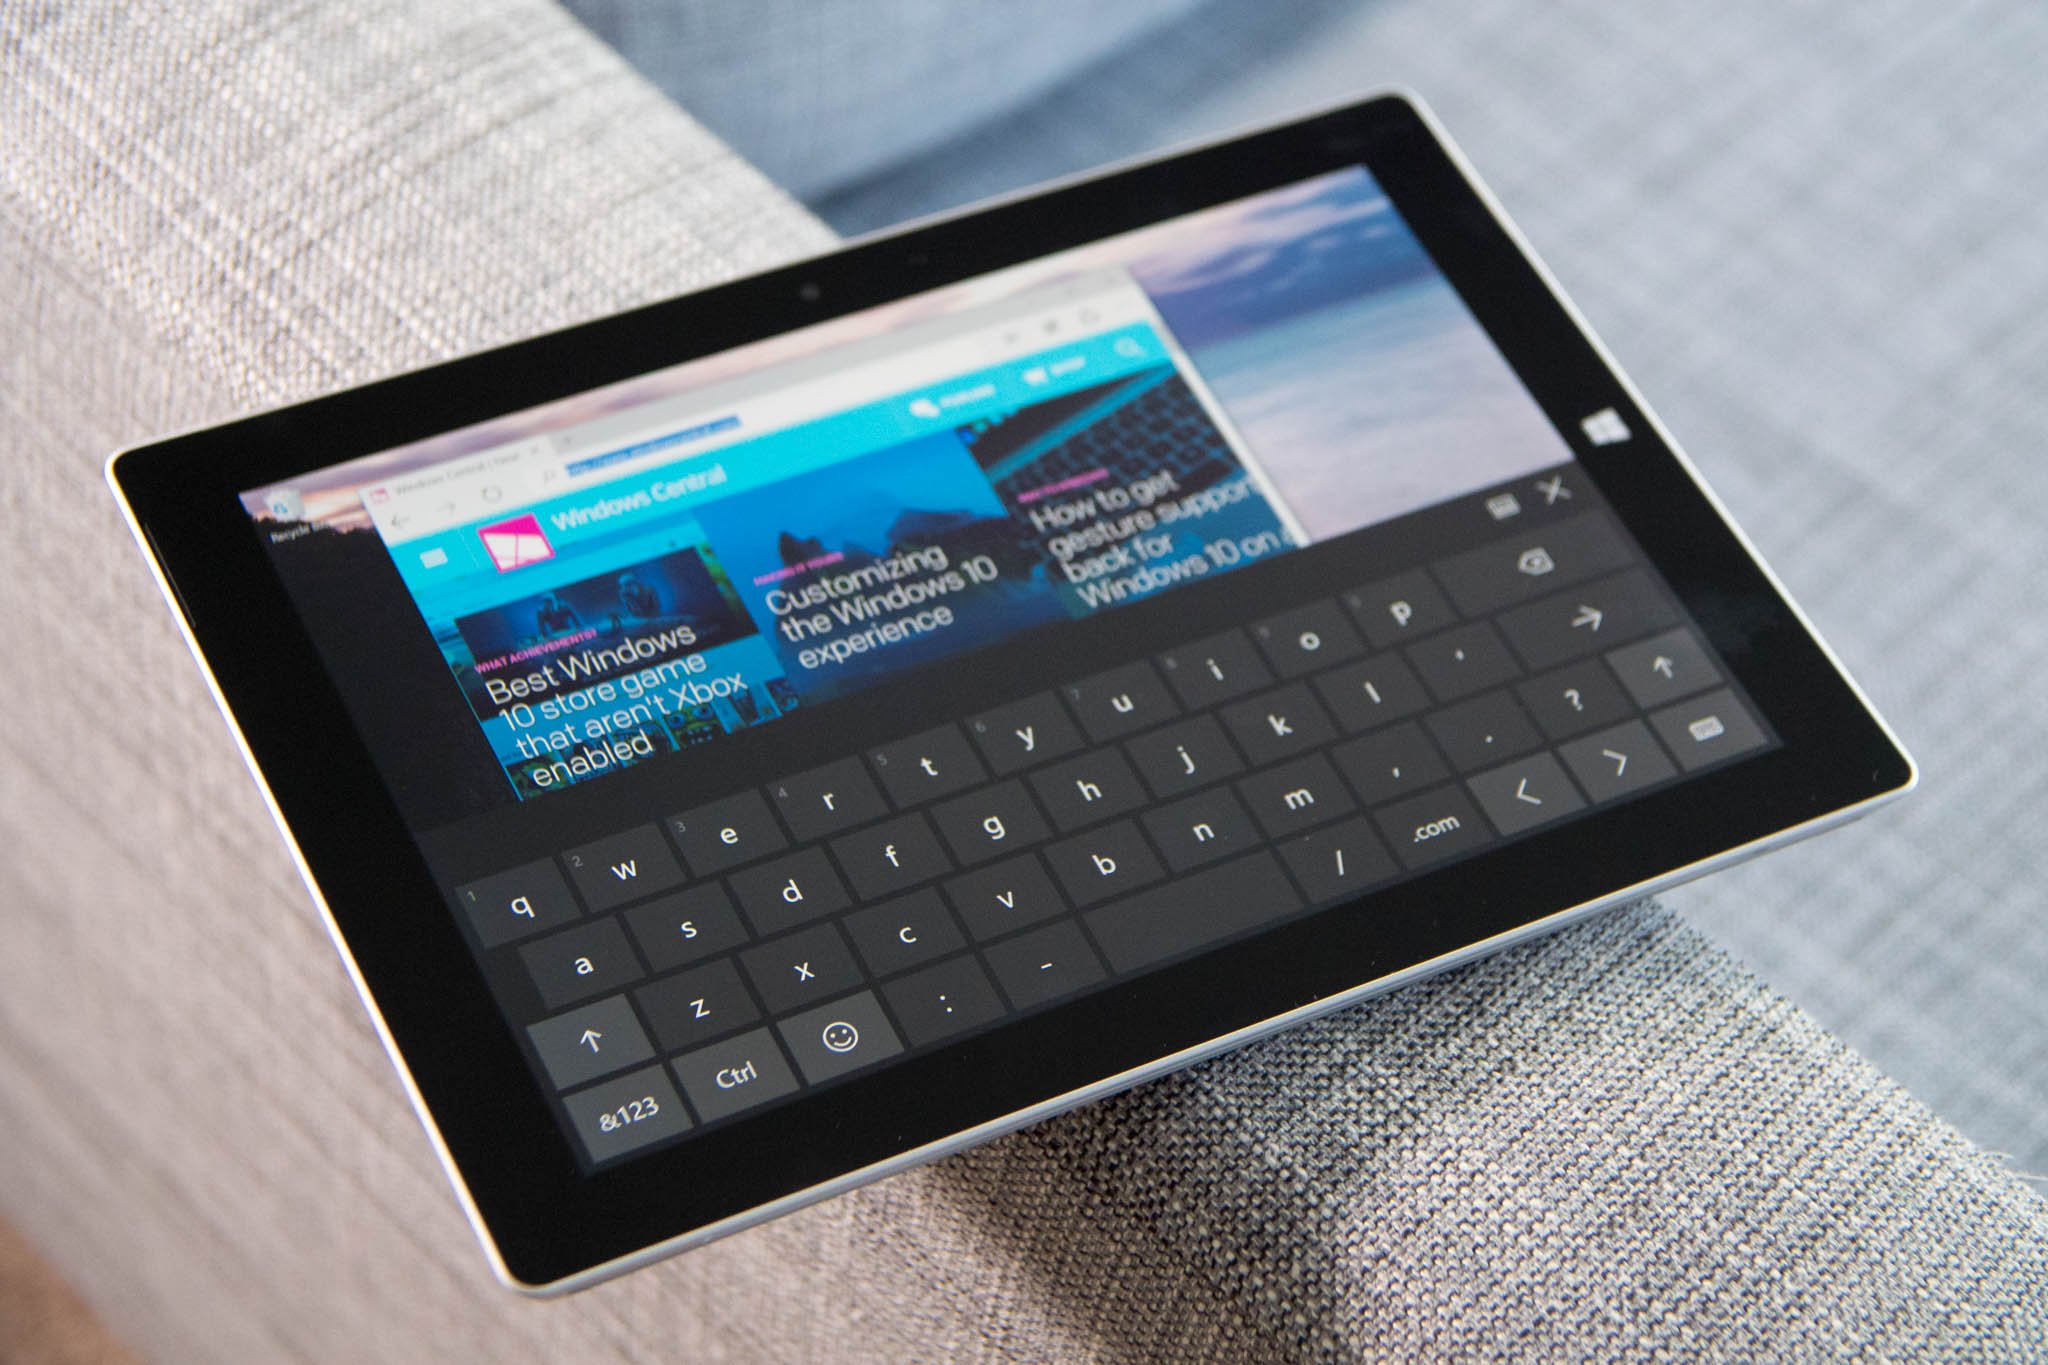 How To Automatically Display The Touch Keyboard In Windows 10